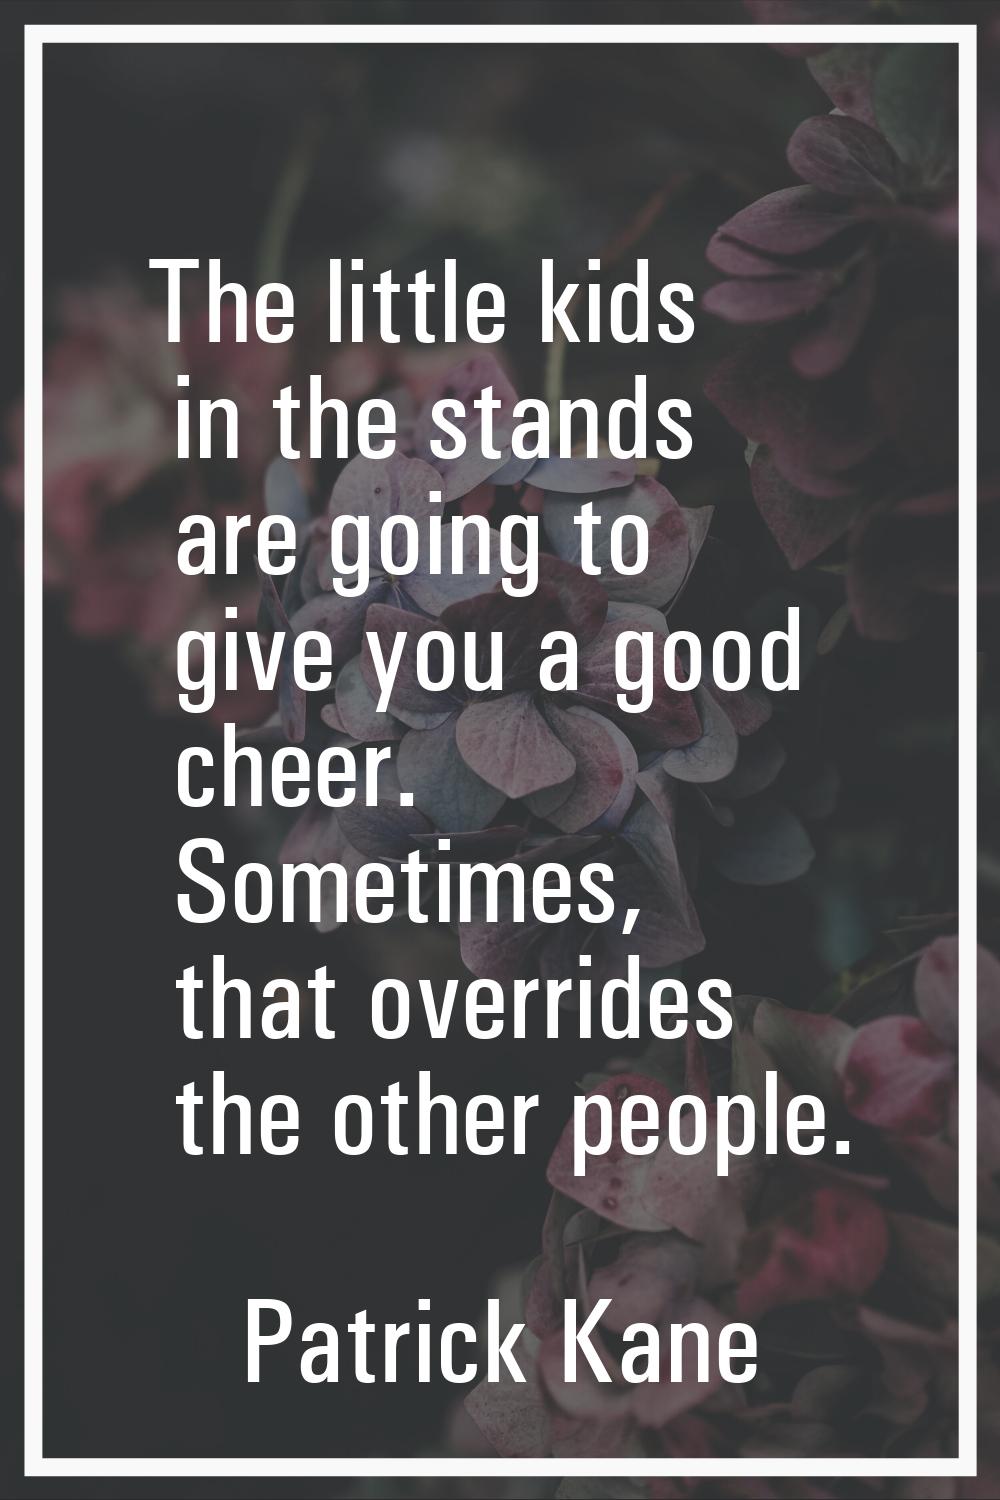 The little kids in the stands are going to give you a good cheer. Sometimes, that overrides the oth